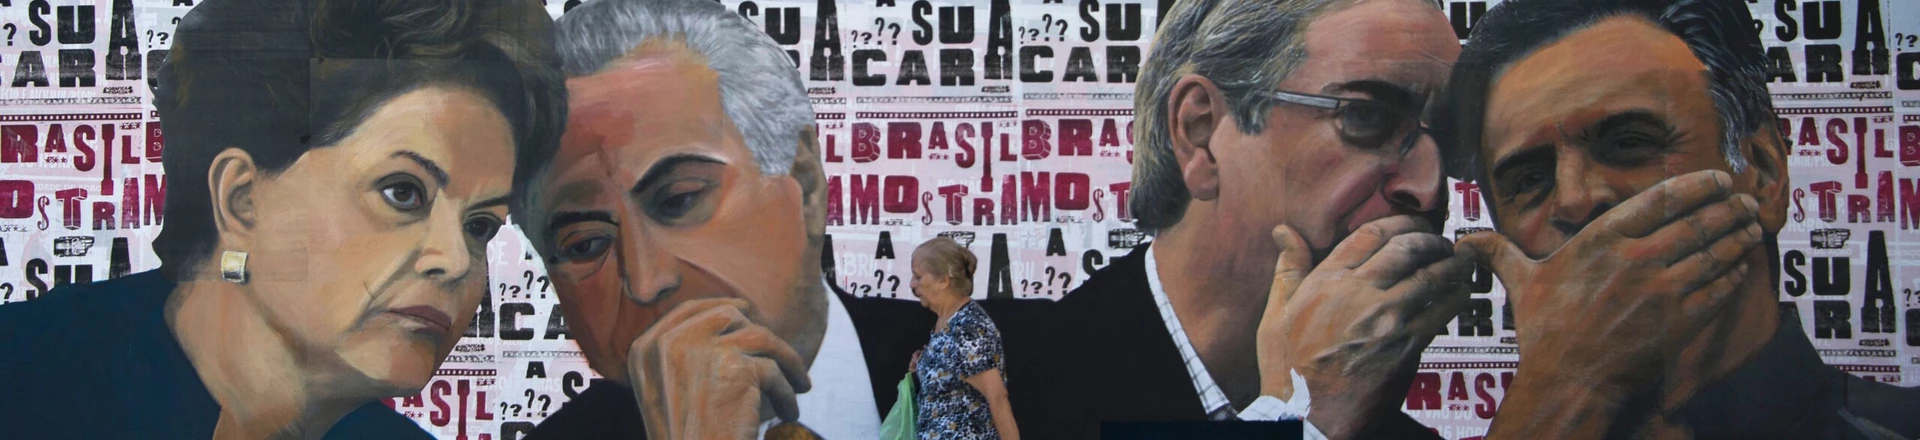 A woman walks past a mural depicting the president of the Brazilian lower house of Congress Eduardo Cunha (2-R) speaking with the president of the Brazilian Social Democracy Party (PSDB) Aecio Neves (R) as if they were conspiring against Brazilian President Dilma Rousseff (L), who is depicted speaking with Vice-President Michel Temer, at Paulista Avenue in Sao Paulo, Brazil on April 19, 2016.Brazil woke Monday to deep political crisis after lawmakers authorized impeachment proceedings against President Dilma Rousseff, sparking claims that democracy was under threat in Latin America's biggest country. / AFP / NELSON ALMEIDA (Photo credit should read NELSON ALMEIDA/AFP/Getty Images)